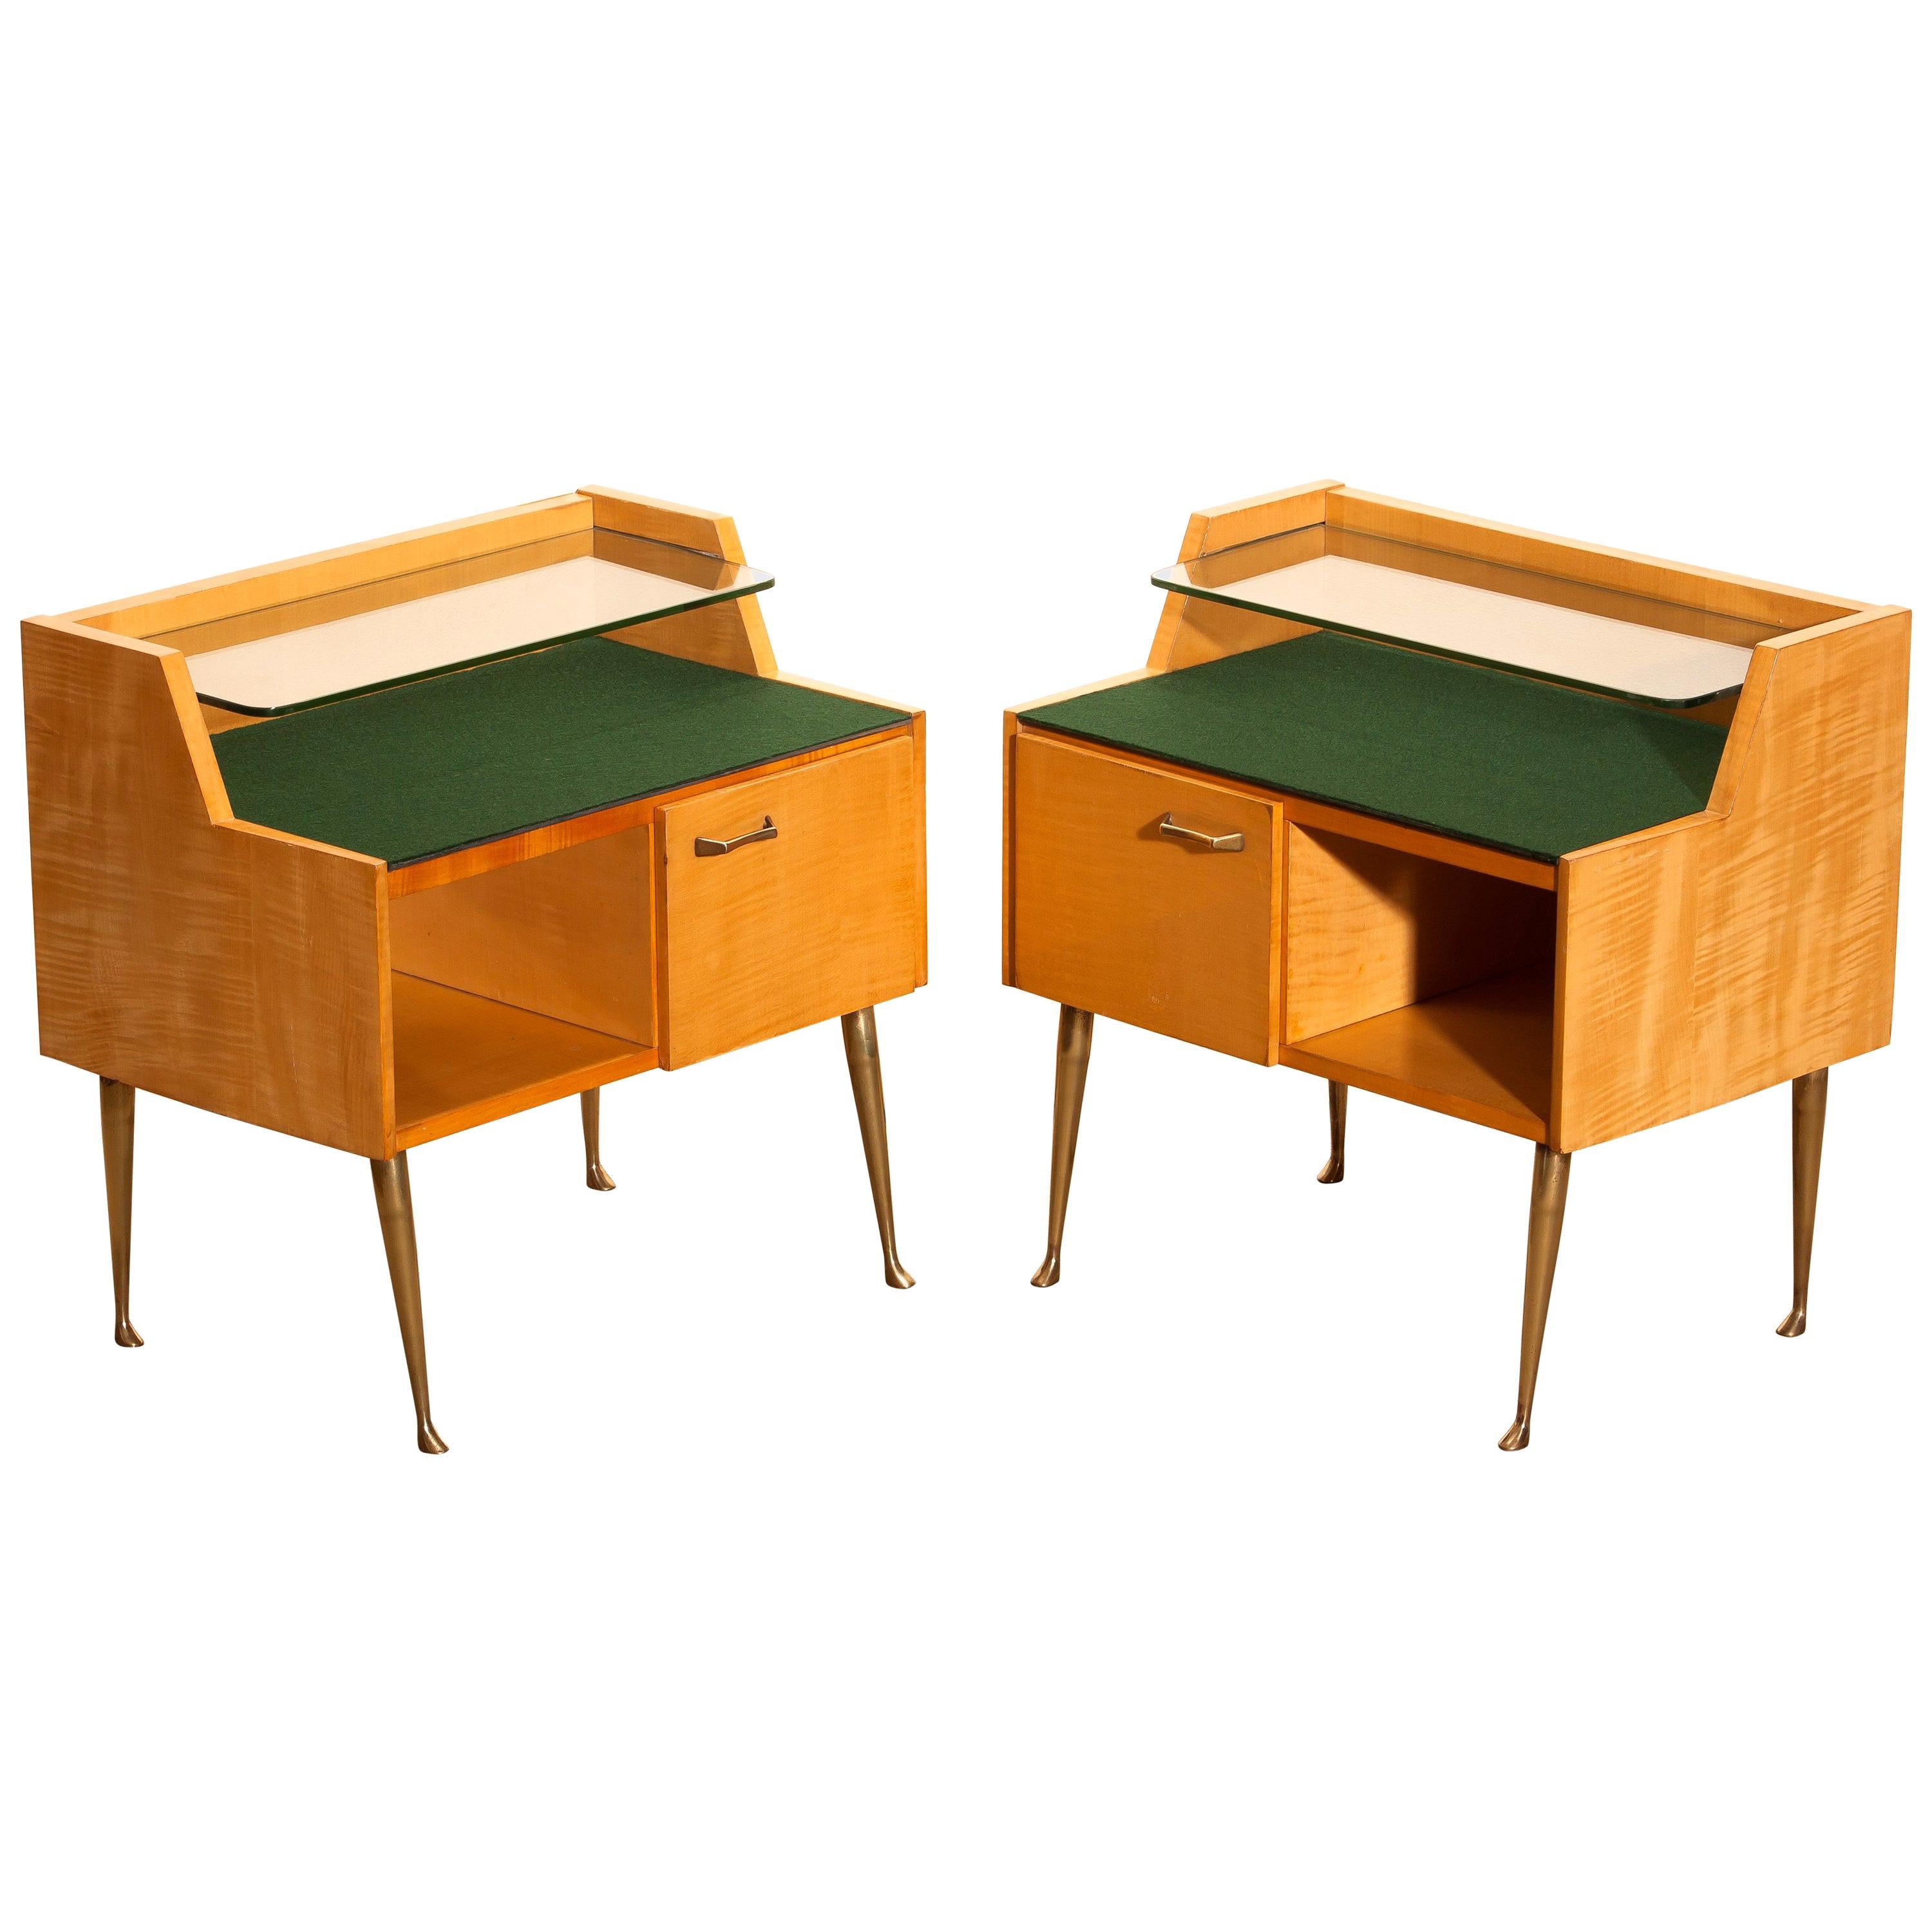 Mid-20th Century 1950s, Pair of Italian Nightstands in Maple with Brass Legs by Paolo Buffa